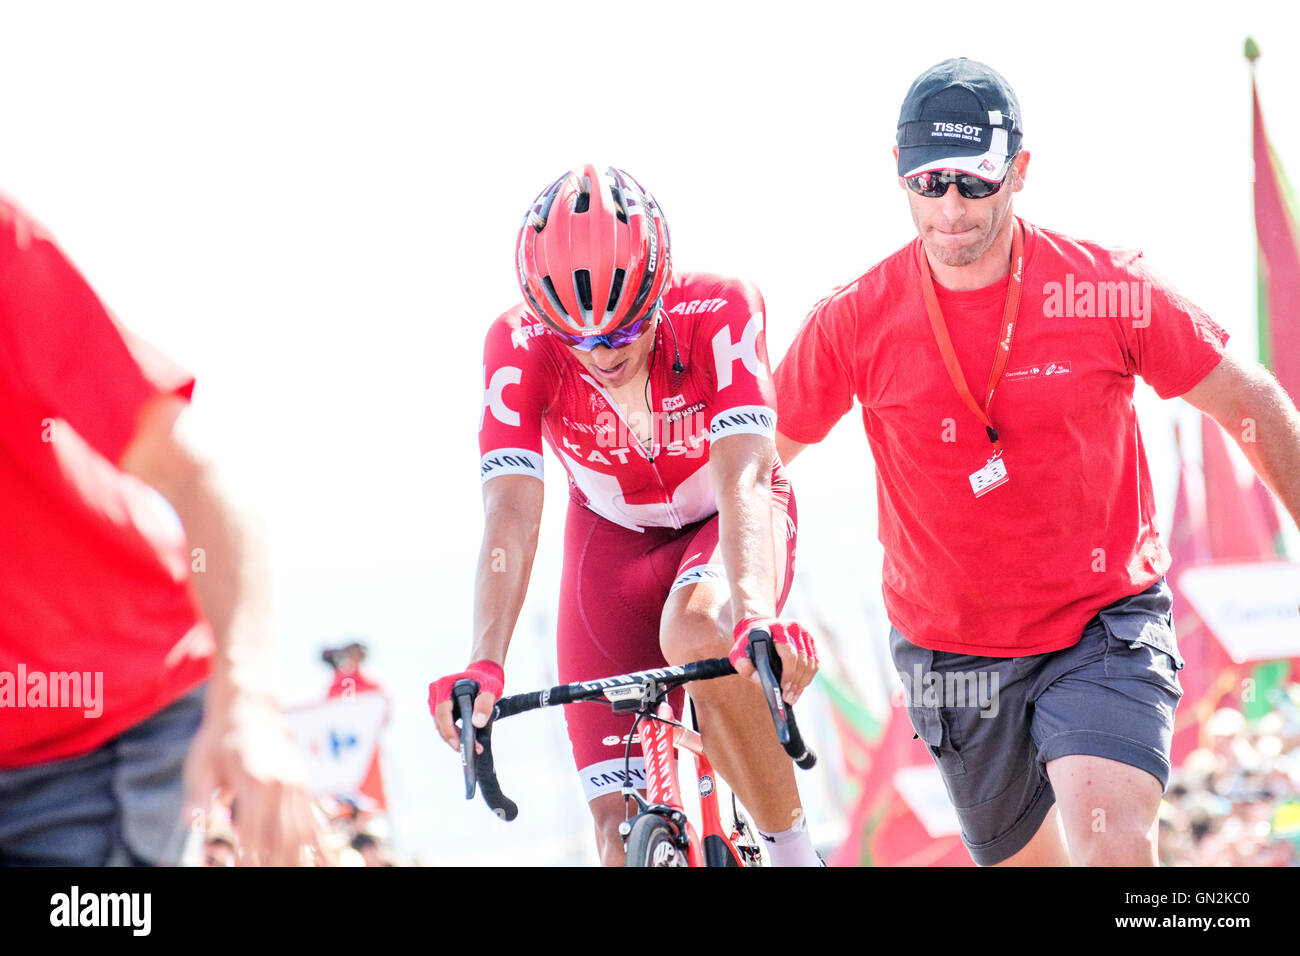 La Camperona, Spain. 27th August, 2016. Jhonatan Restrepo (Katusha Team) finishes the 8th stage of cycling race ‘La Vuelta a España’ (Tour of Spain) between Villalpando and Climb of La Camperona on August 27, 2016 in Leon, Spain. Credit: David Gato/Alamy Live News Stock Photo